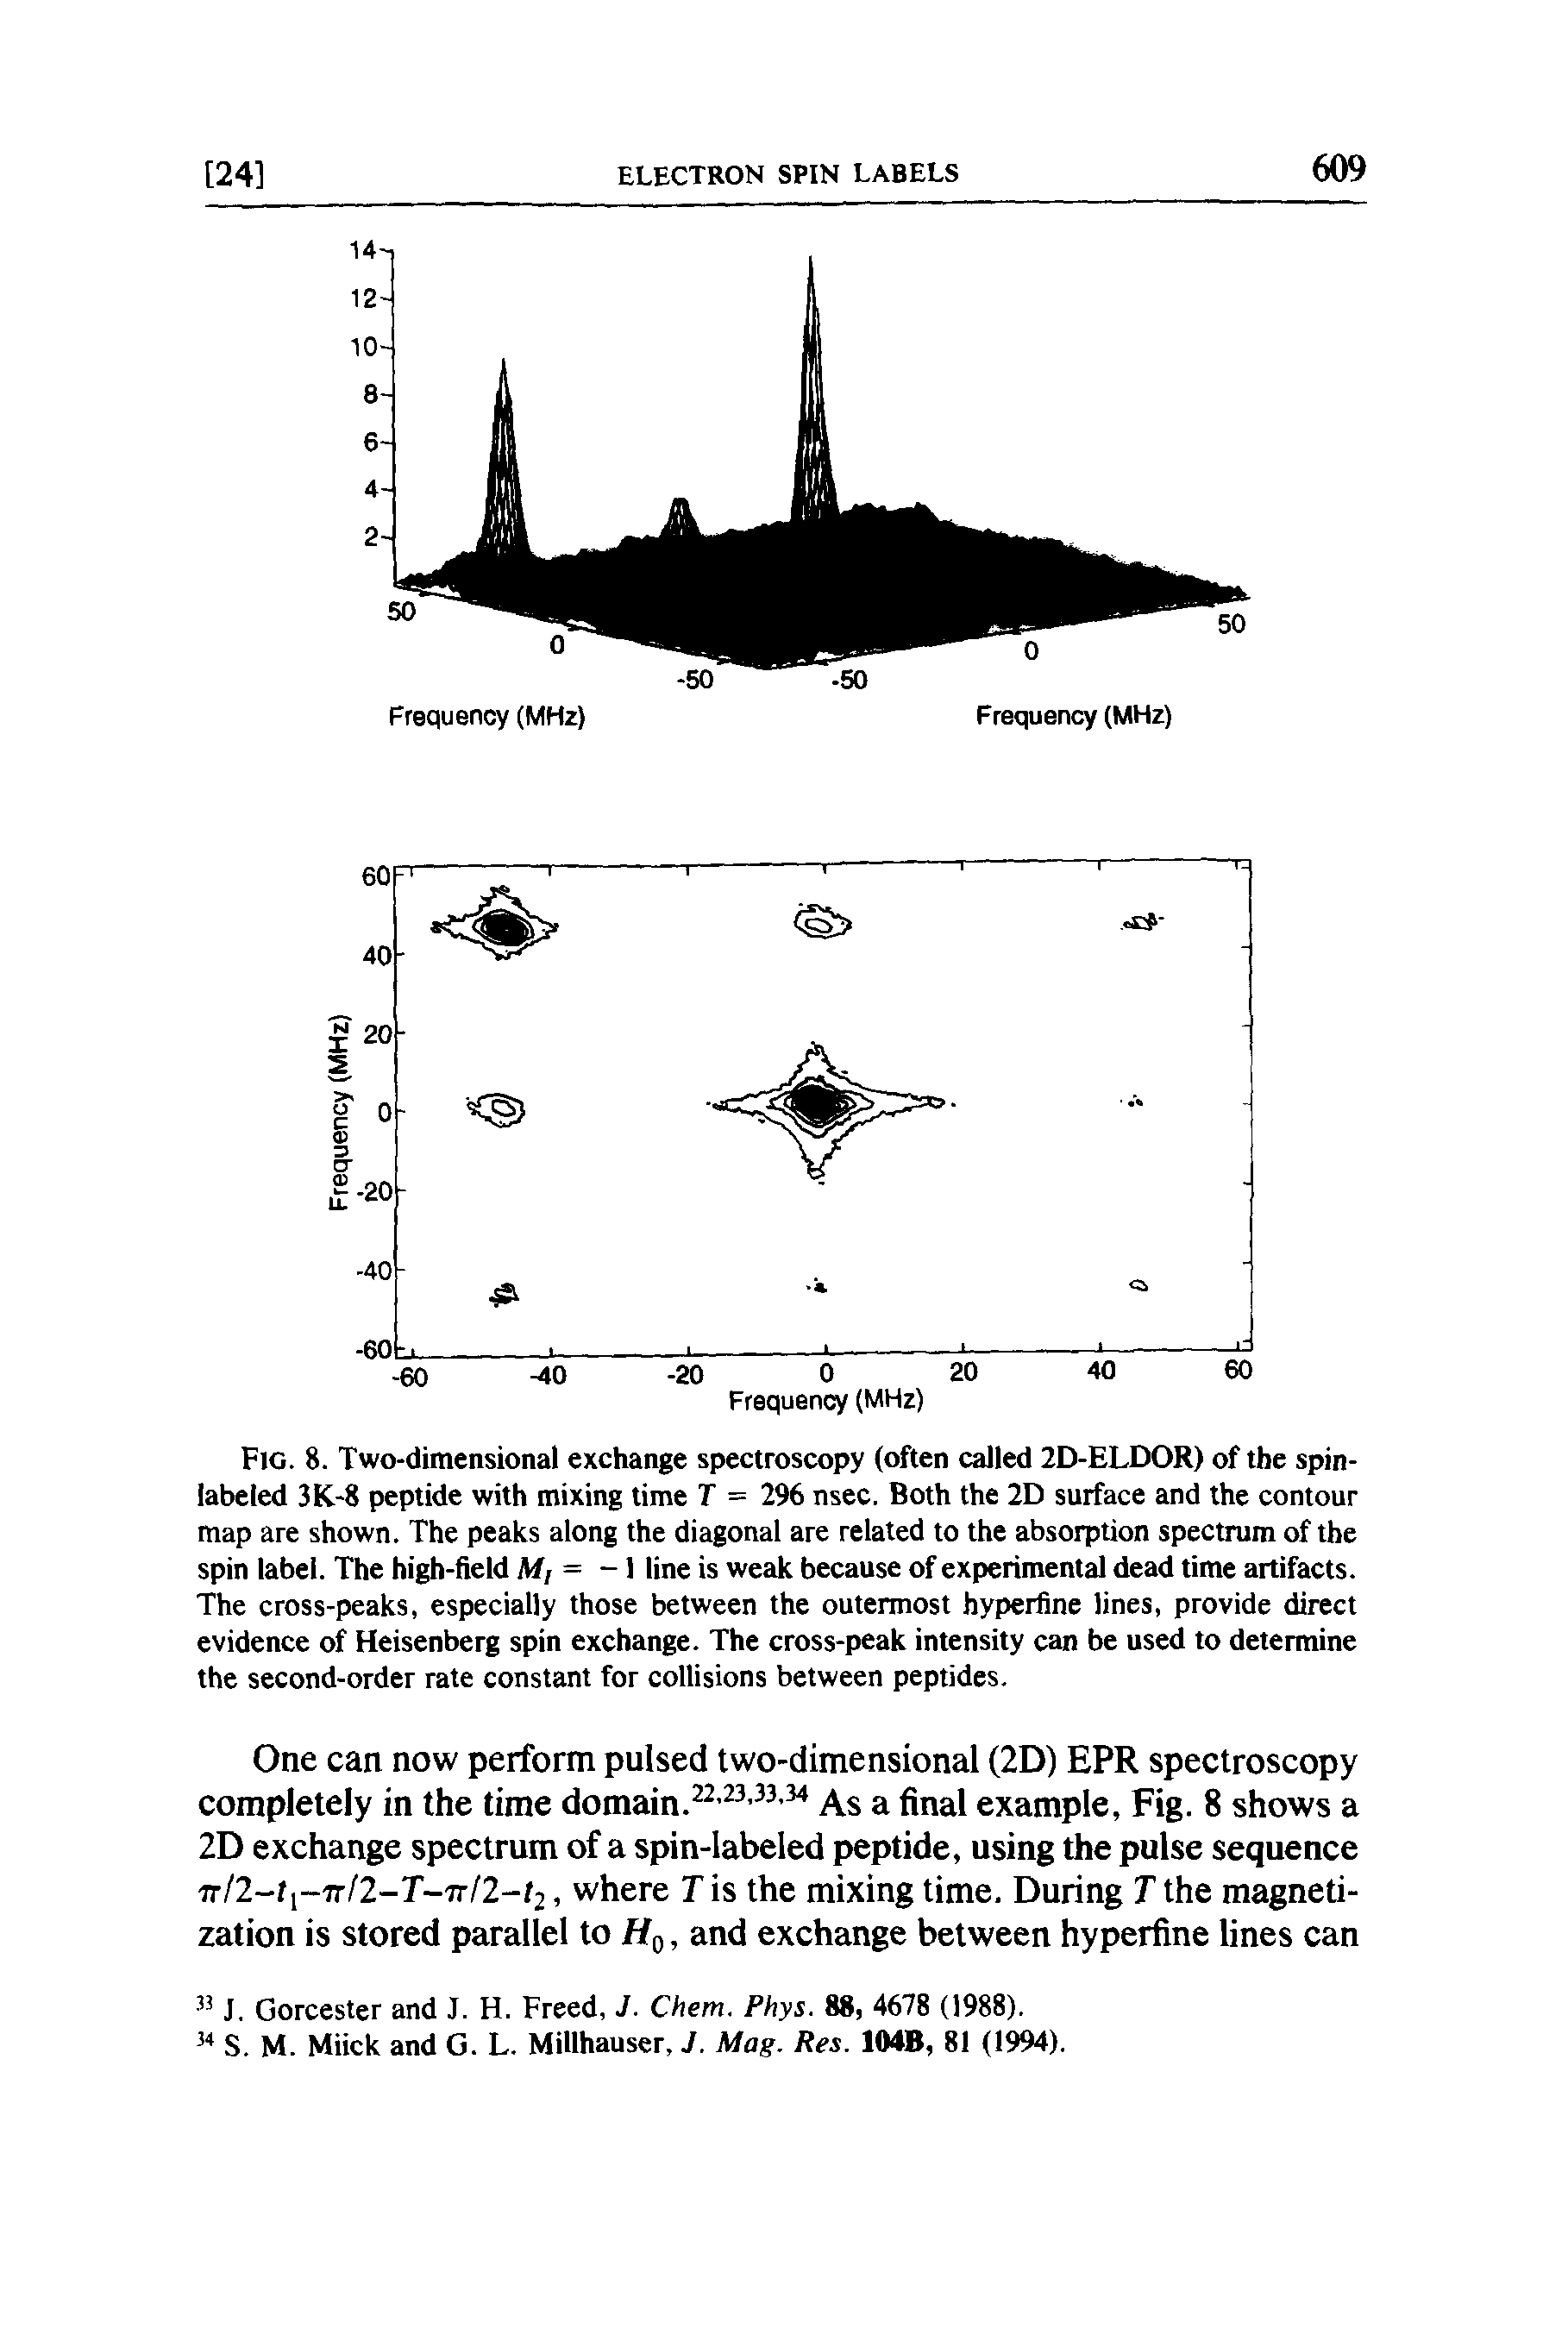 Fig. 8. Two-dimensional exchange spectroscopy (often called 2D-ELDOR) of the spin-labeled 3K-8 peptide with mixing time T = 296 nsec. Both the 2D surface and the contour map are shown. The peaks along the diagonal are related to the absorption spectrum of the spin label. The high-held M,= - line is weak because of experimental dead time artifacts. The cross-peaks, especially those between the outermost hyperfine lines, provide direct evidence of Heisenberg spin exchange. The cross-peak intensity can be used to determine the second-order rate constant for collisions between peptides.